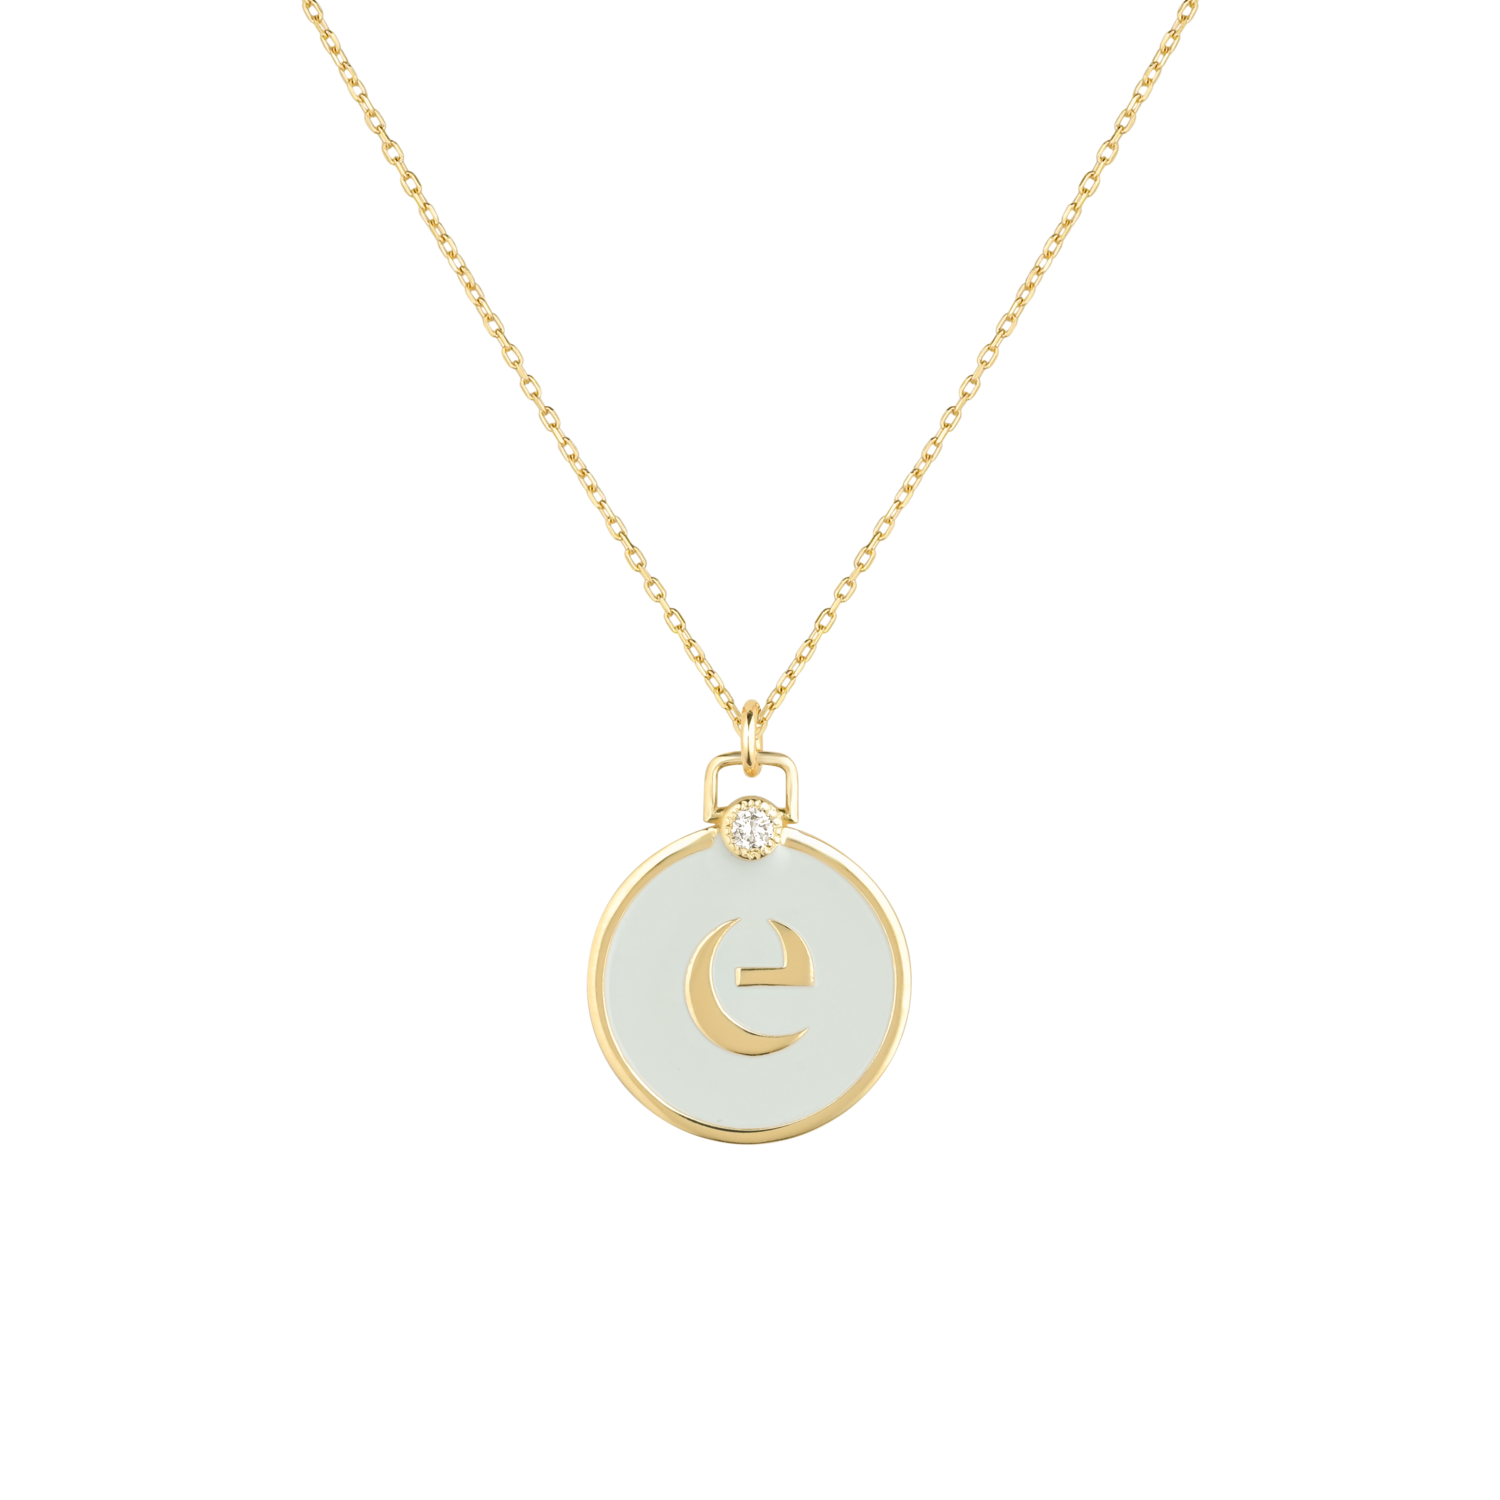 ​Initials Diamond Necklace Letter E with Enamel